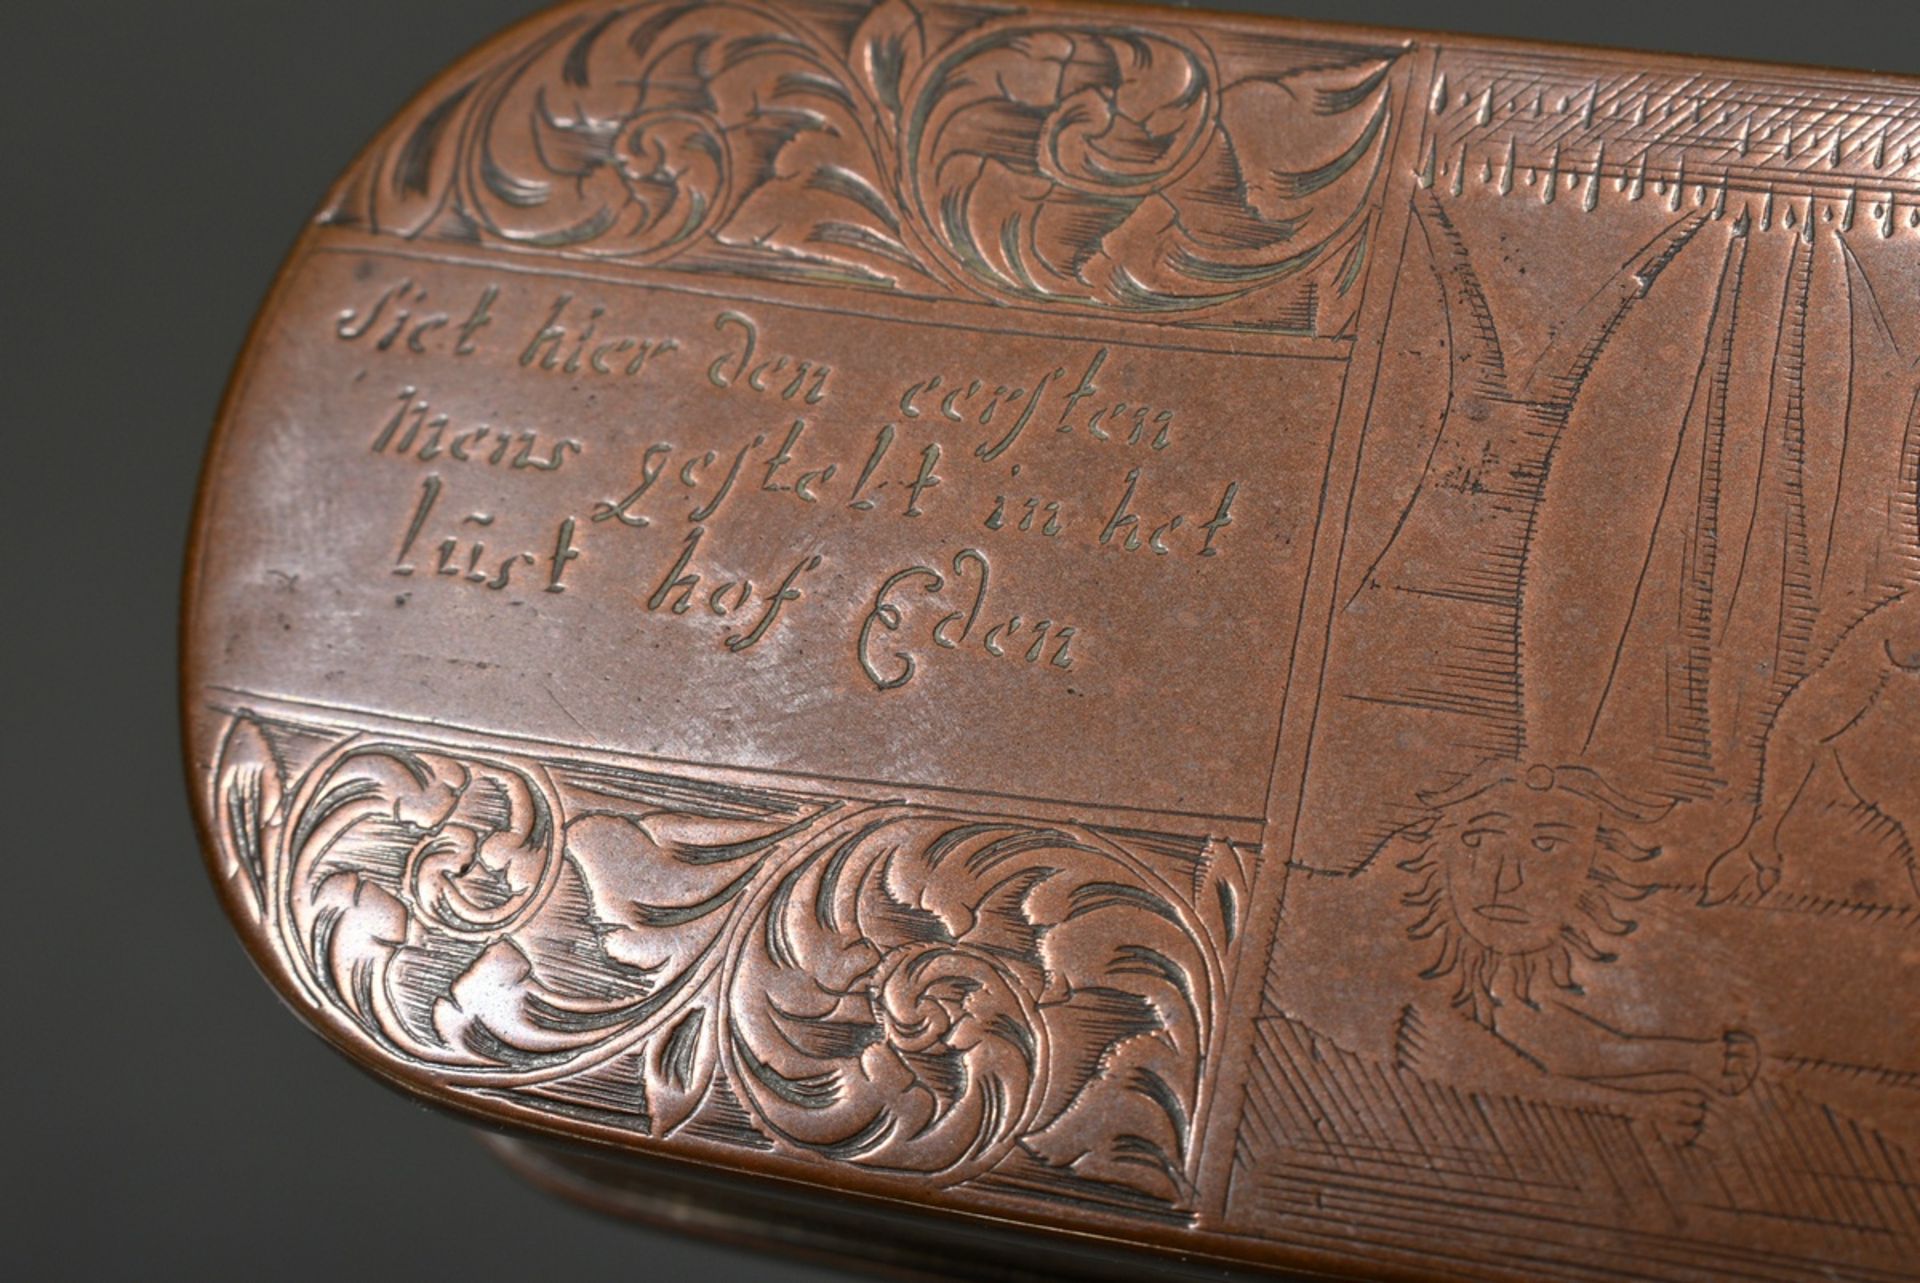 Brass tobacco box with detailed engraving "Creation of Adam" and saying "Siet hier den eersten mens - Image 5 of 9